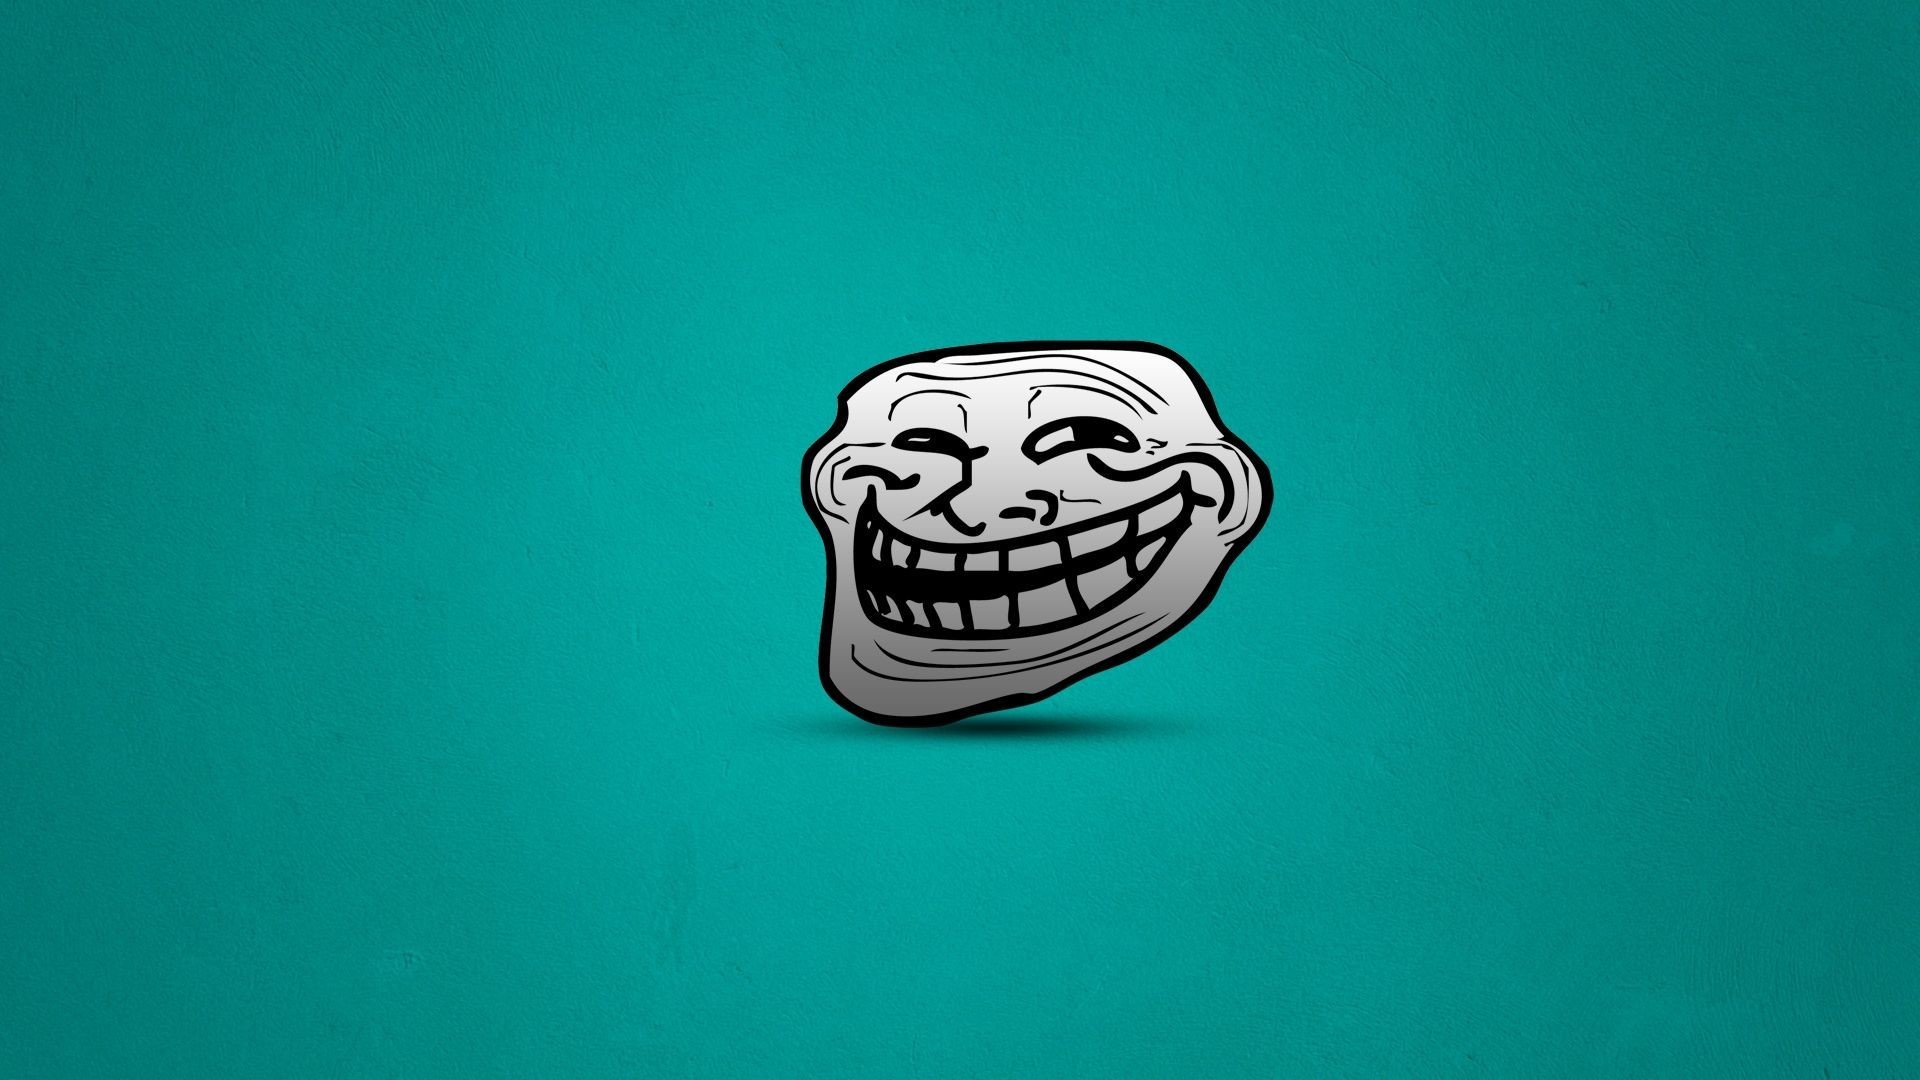 1920x1080  funny troll face uhd wallpapers - Ultra High Definition Wallpapers  .